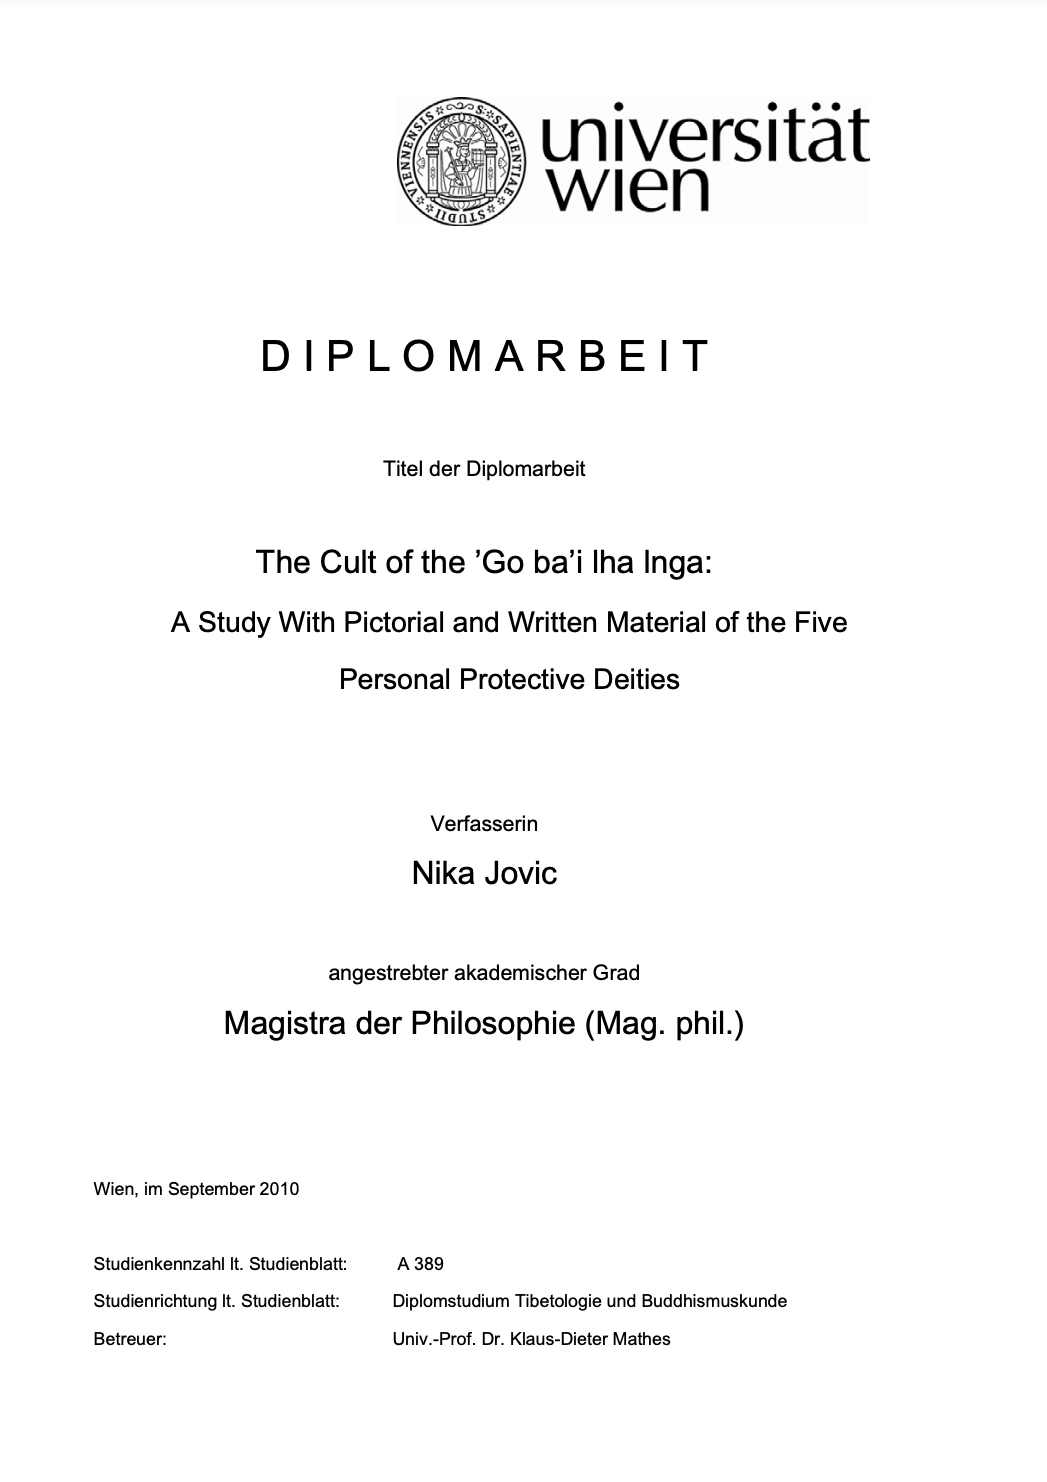 The Cult of the Go bai lha lnga A Study With Pictorial and Written Material of the Five Personal Protective Deities-front.jpg